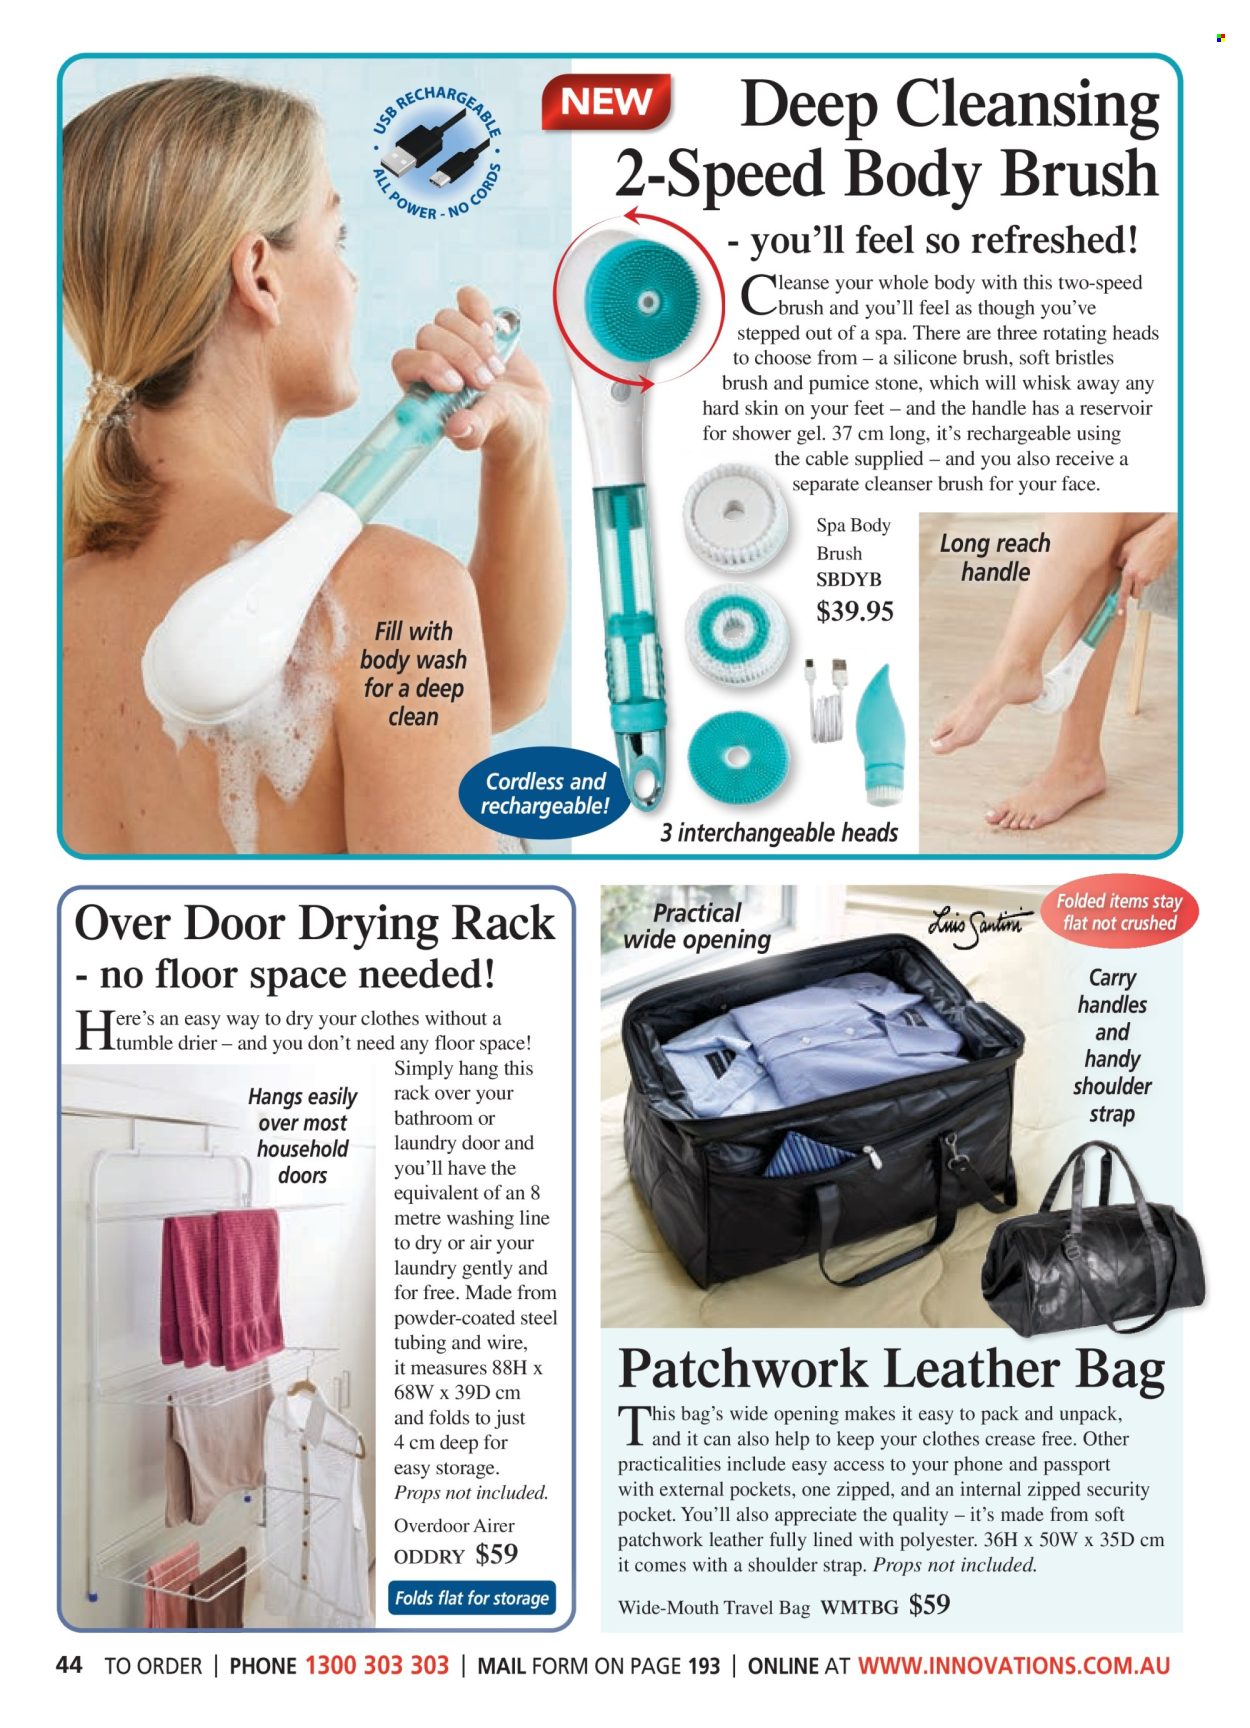 thumbnail - Innovations Catalogue - Sales products - drying rack, airer, bag, leather bag. Page 44.